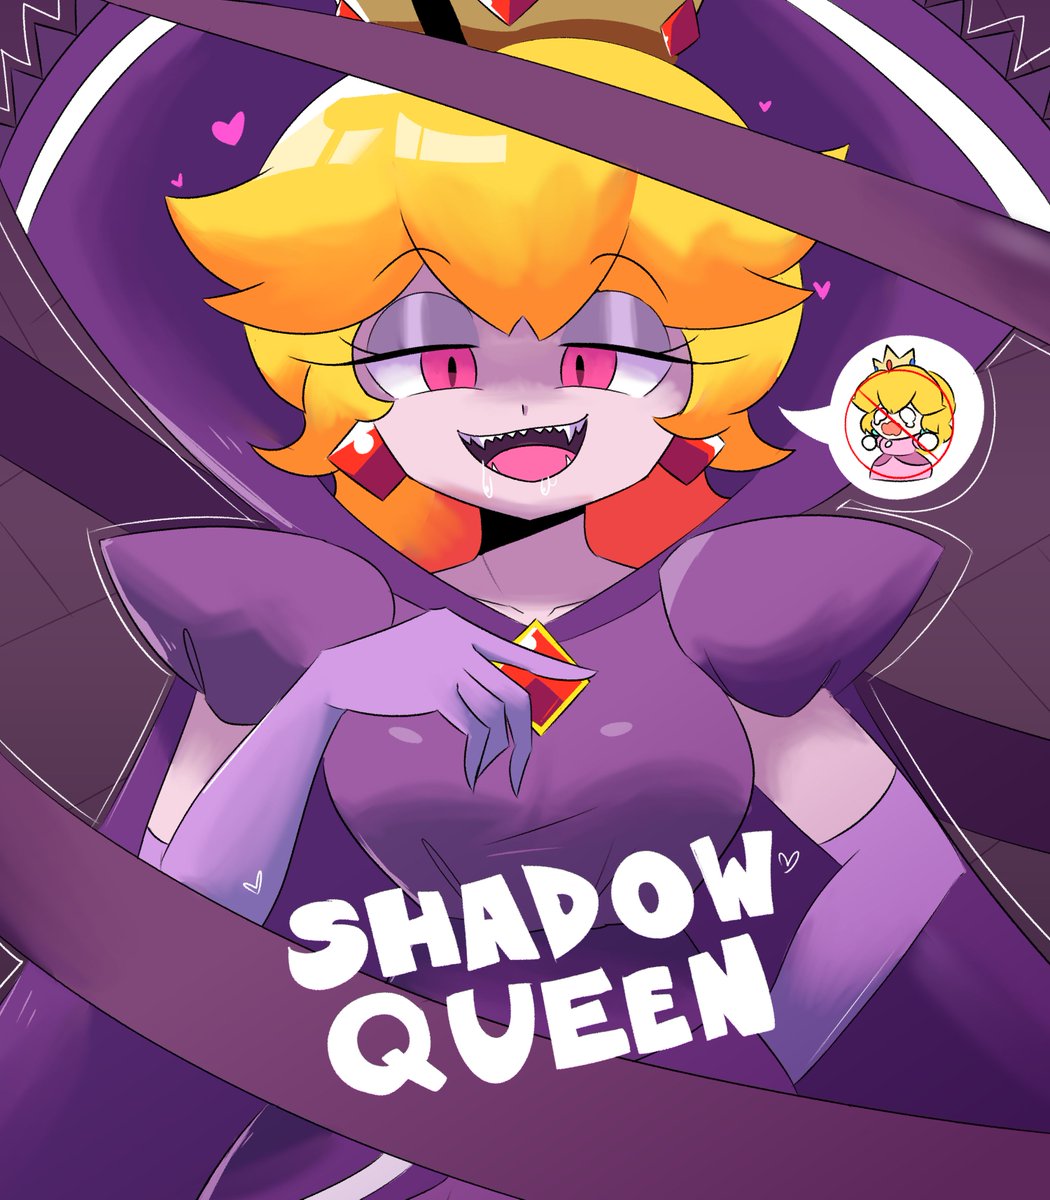 SHADOW QUEEN PEACH ?

from paper mario: the thousand-year door 